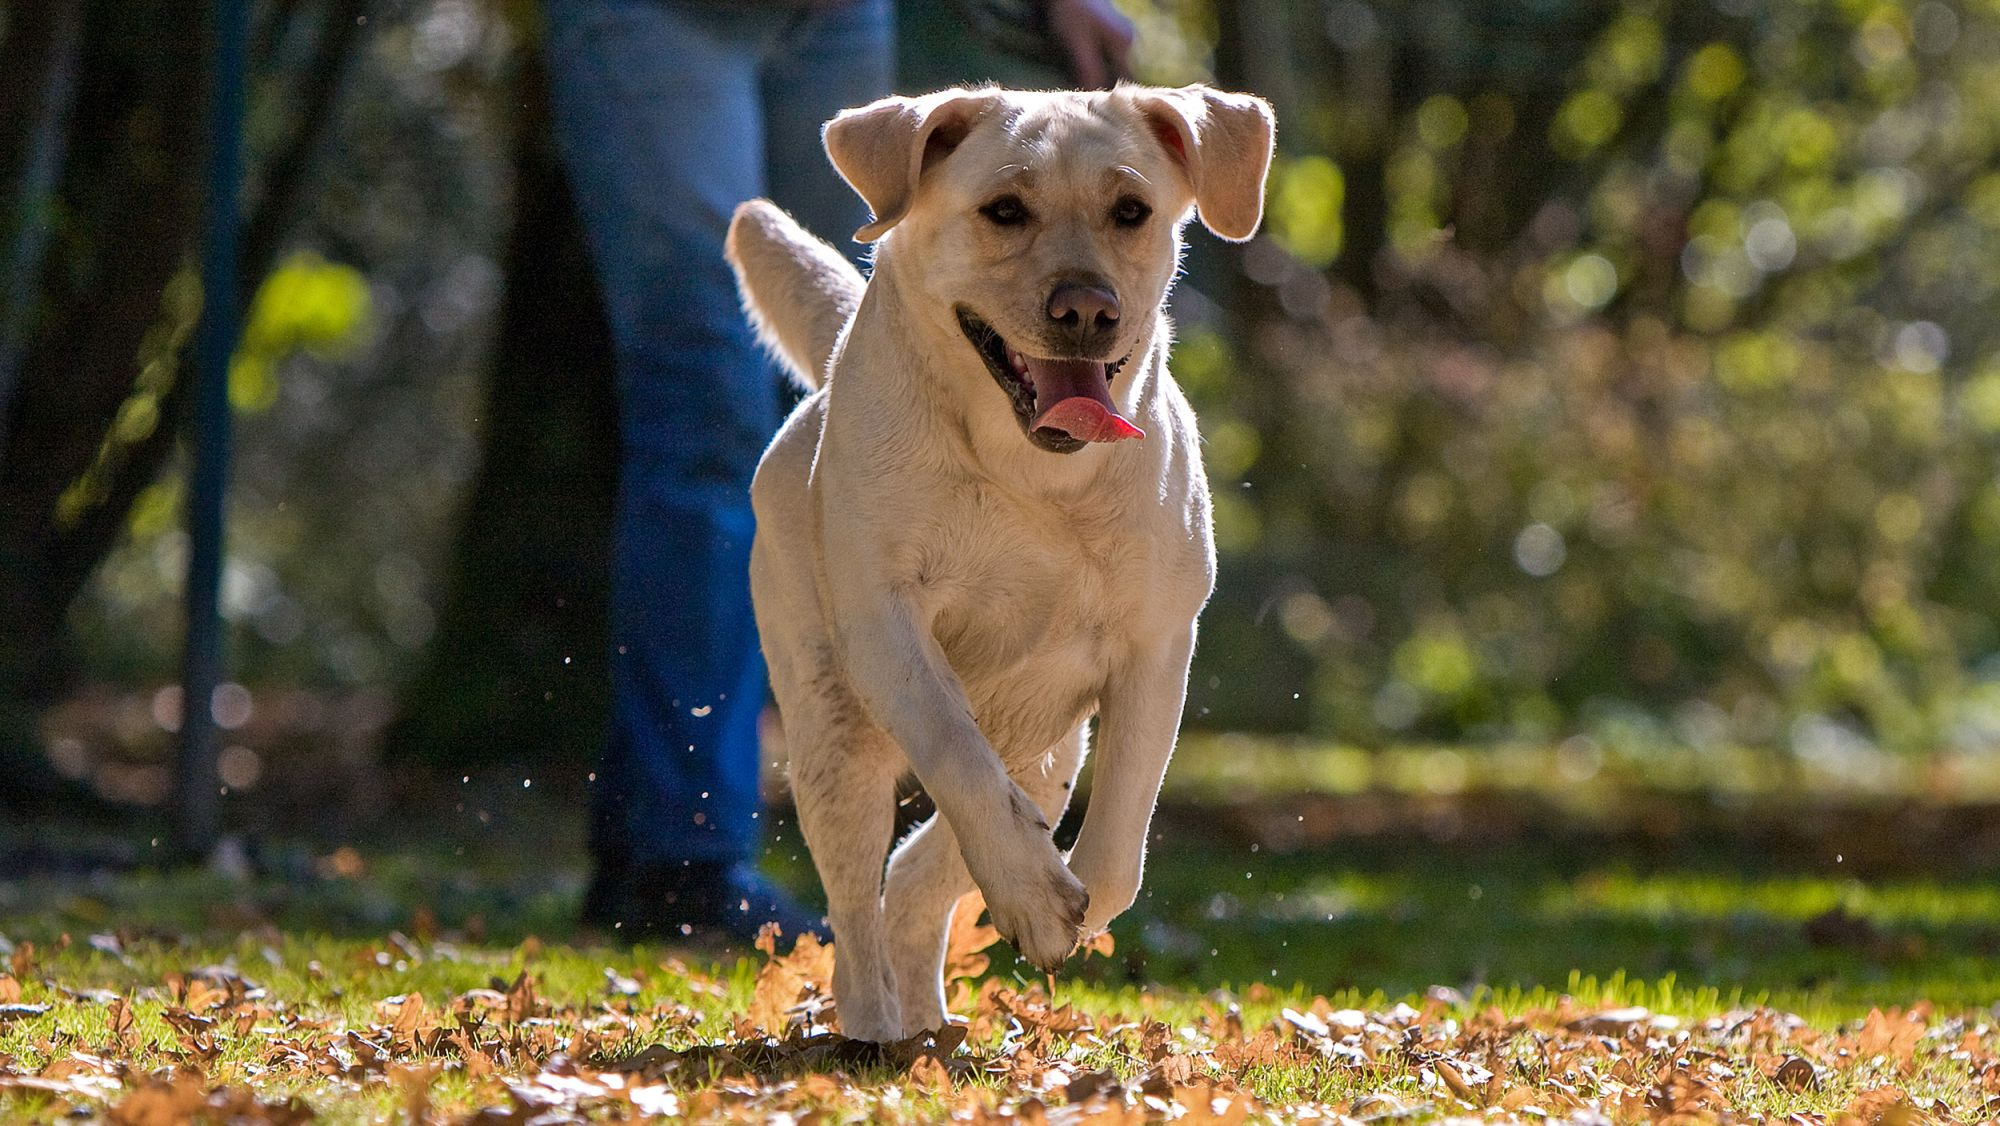 Labrador Retriever adult running through leaves while owner stands behind.